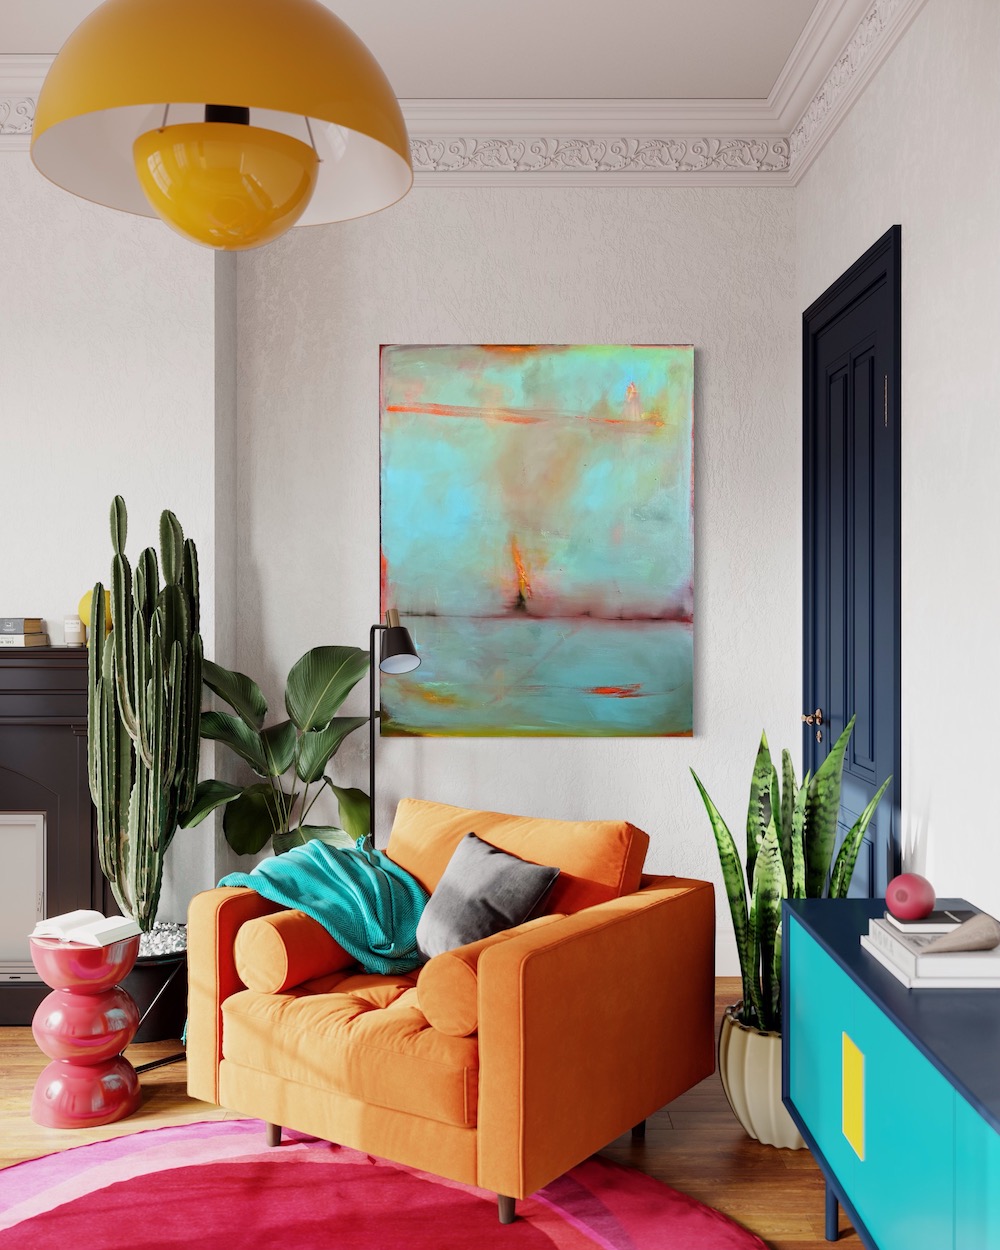 colorful abstract painting wall art from MASH Gallery in a modern Los Angeles living room with orange modern oversized chair, orange light and pink rug